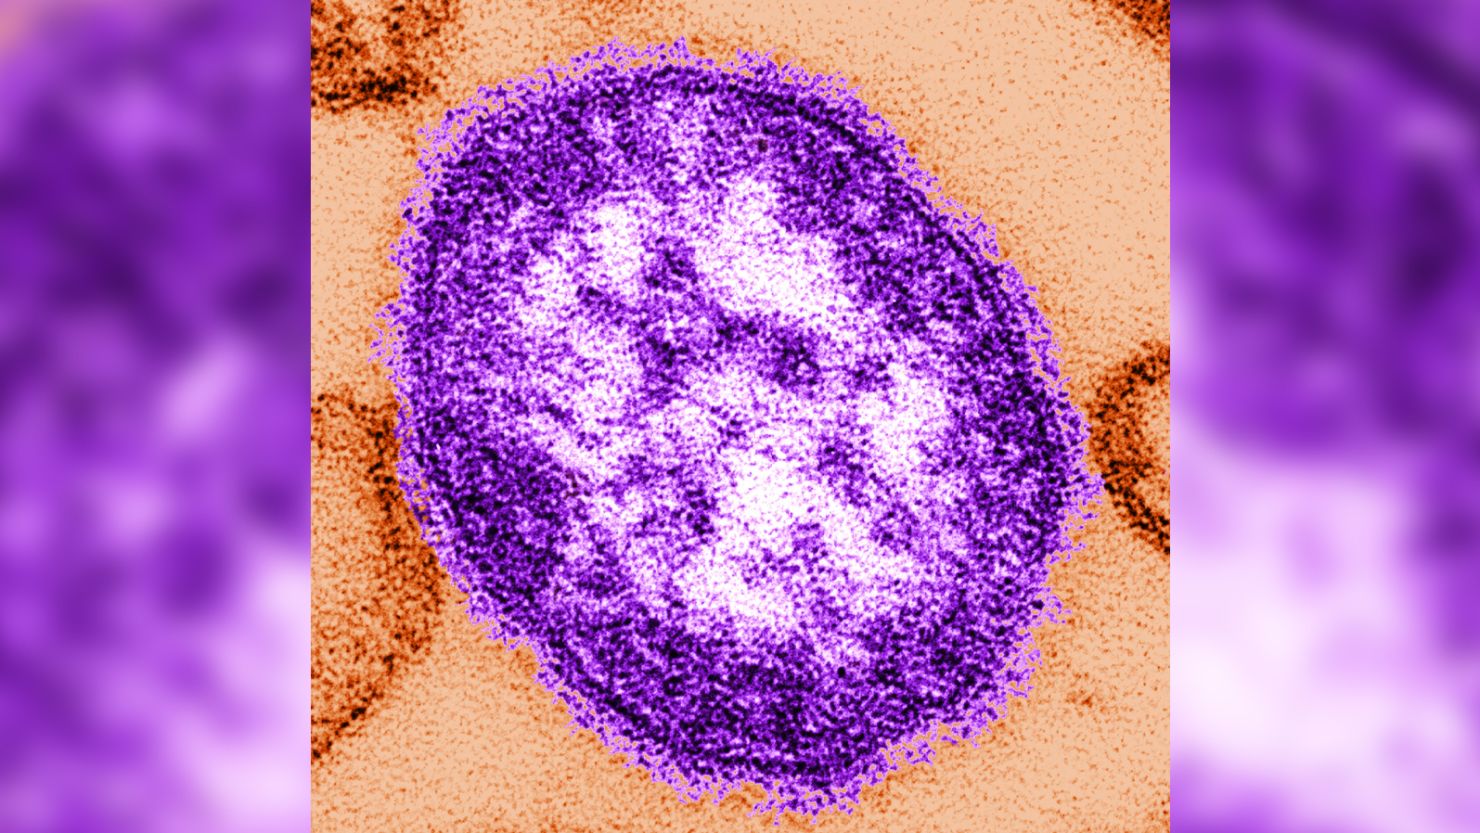 Digitally-colorized, thin-section transmission electron microscopic image of a single measles virus particle, with the viral nucleocapsid situated underneath the viral envelope, surrounded by surface projections.